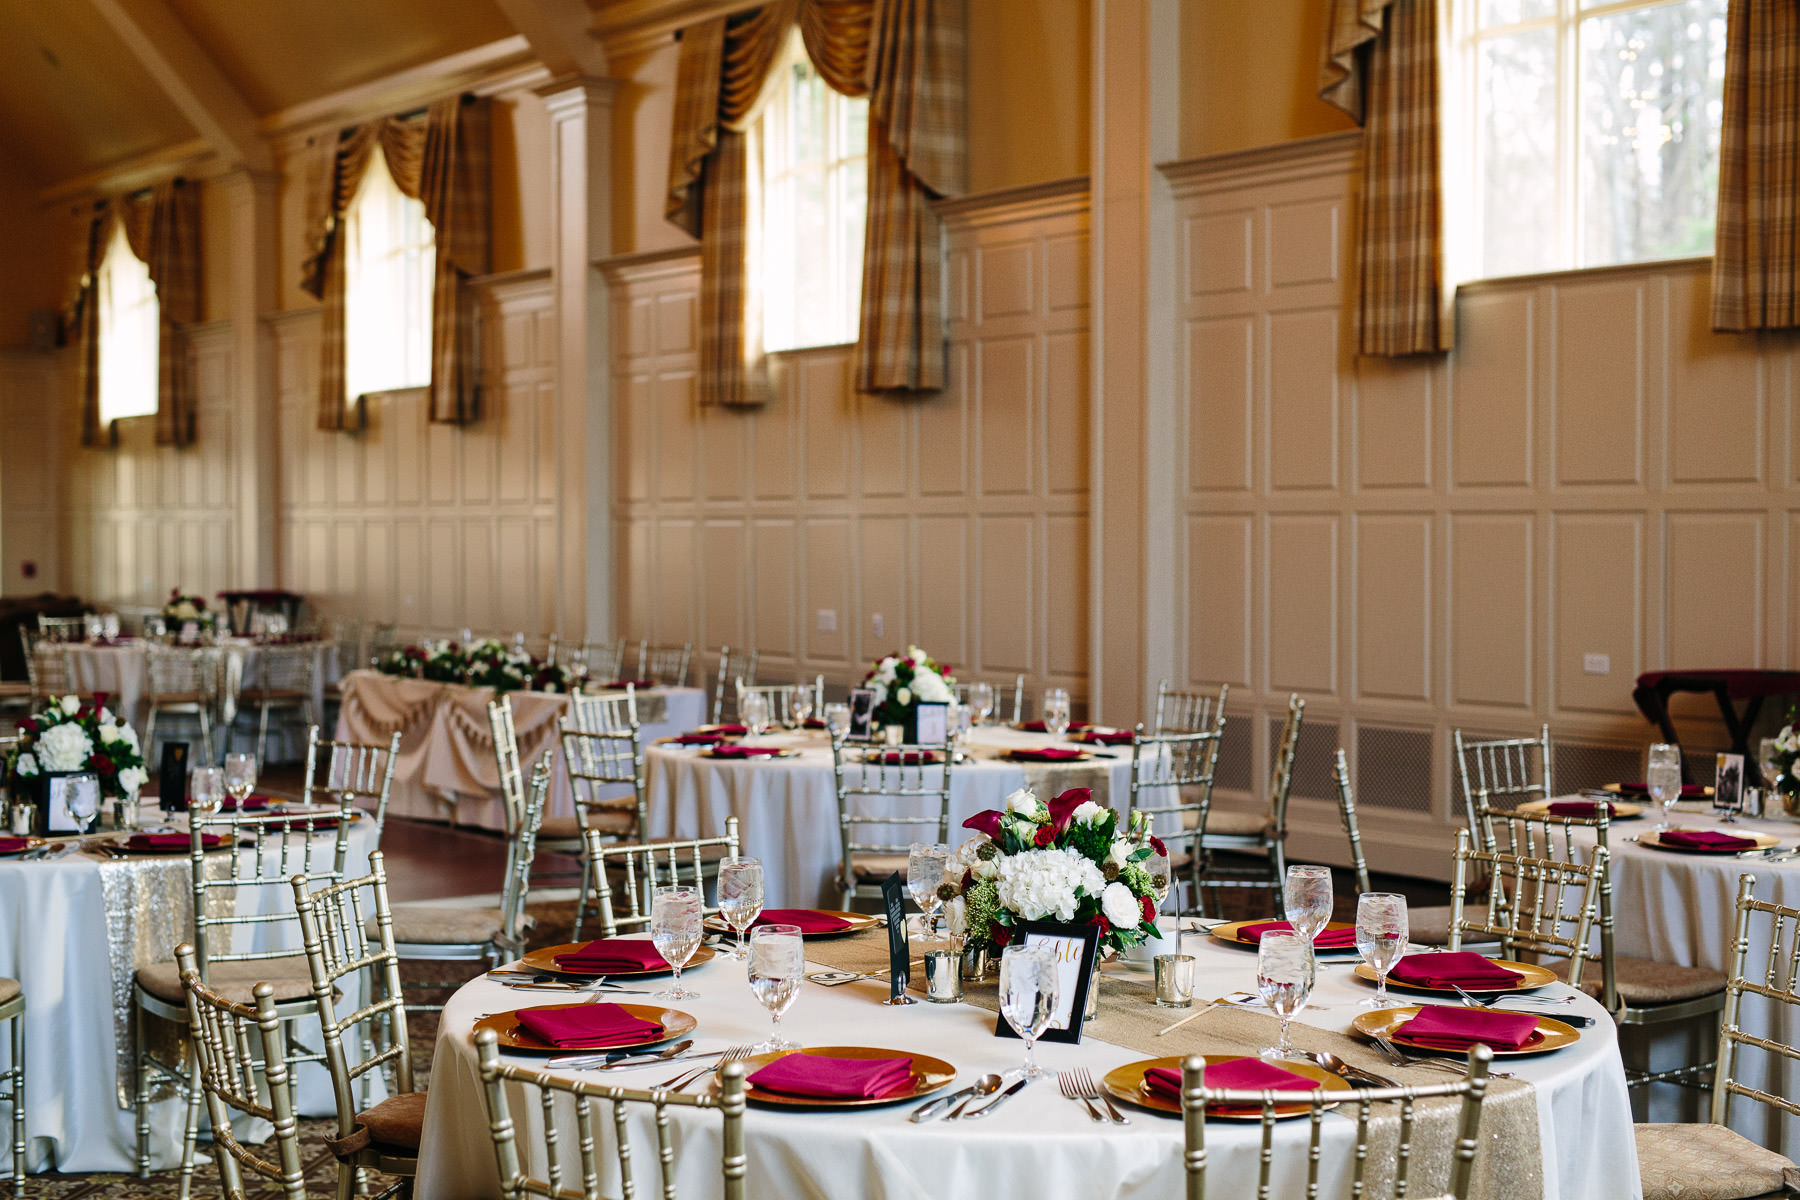 Red and gold wedding details  at the Renaissance Golf Club in Haverhill, MA.